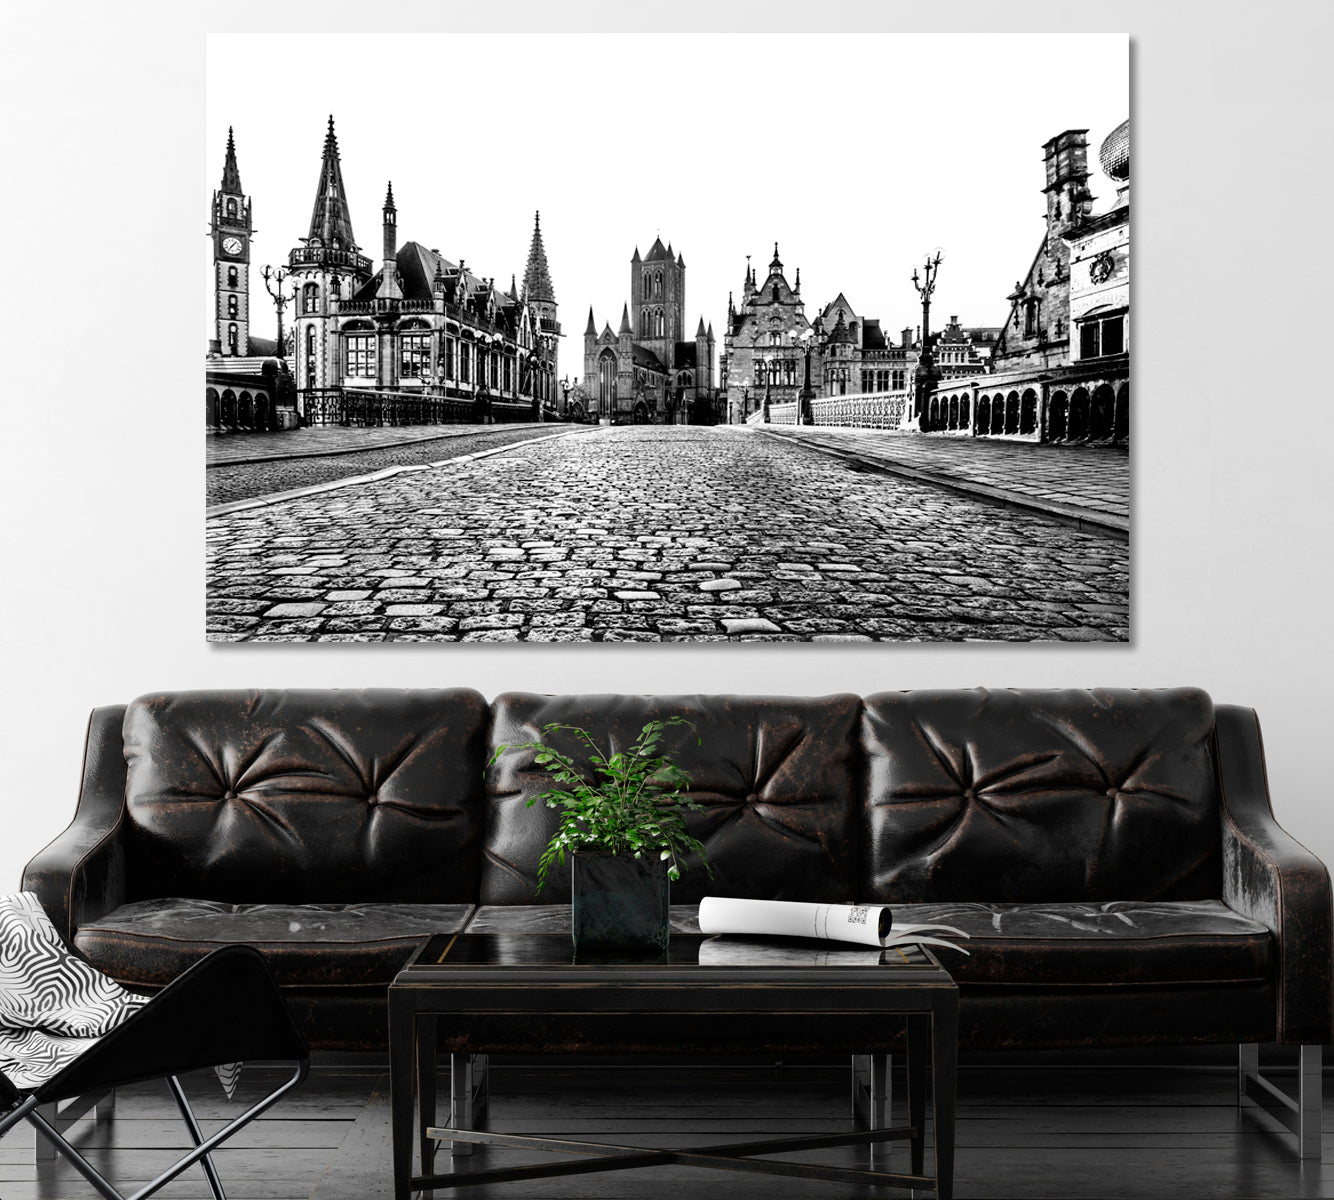 Ghent Belgium Canvas Print ArtLexy 1 Panel 24"x16" inches 